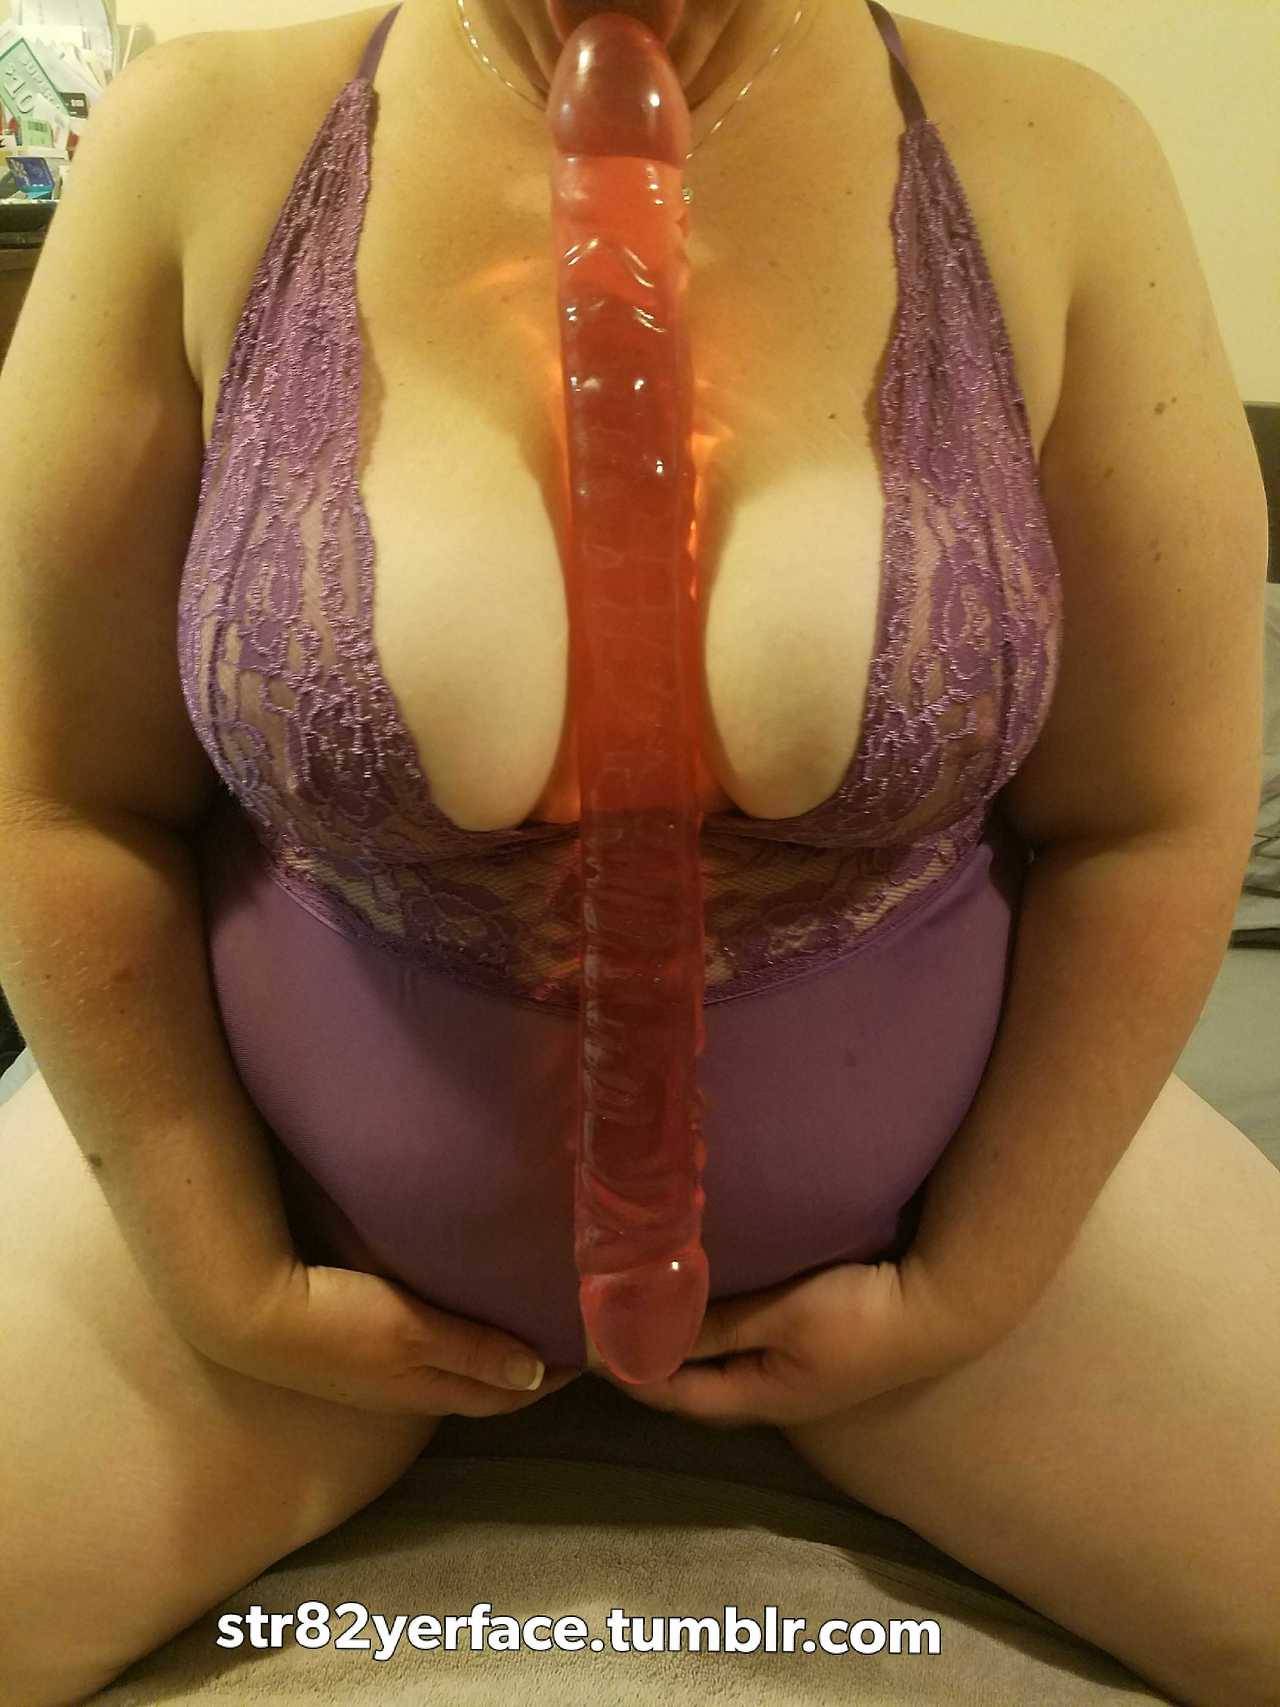 str82yerface:  Who wants to see me and the beautiful @daddyskinkybabye fuck our wet